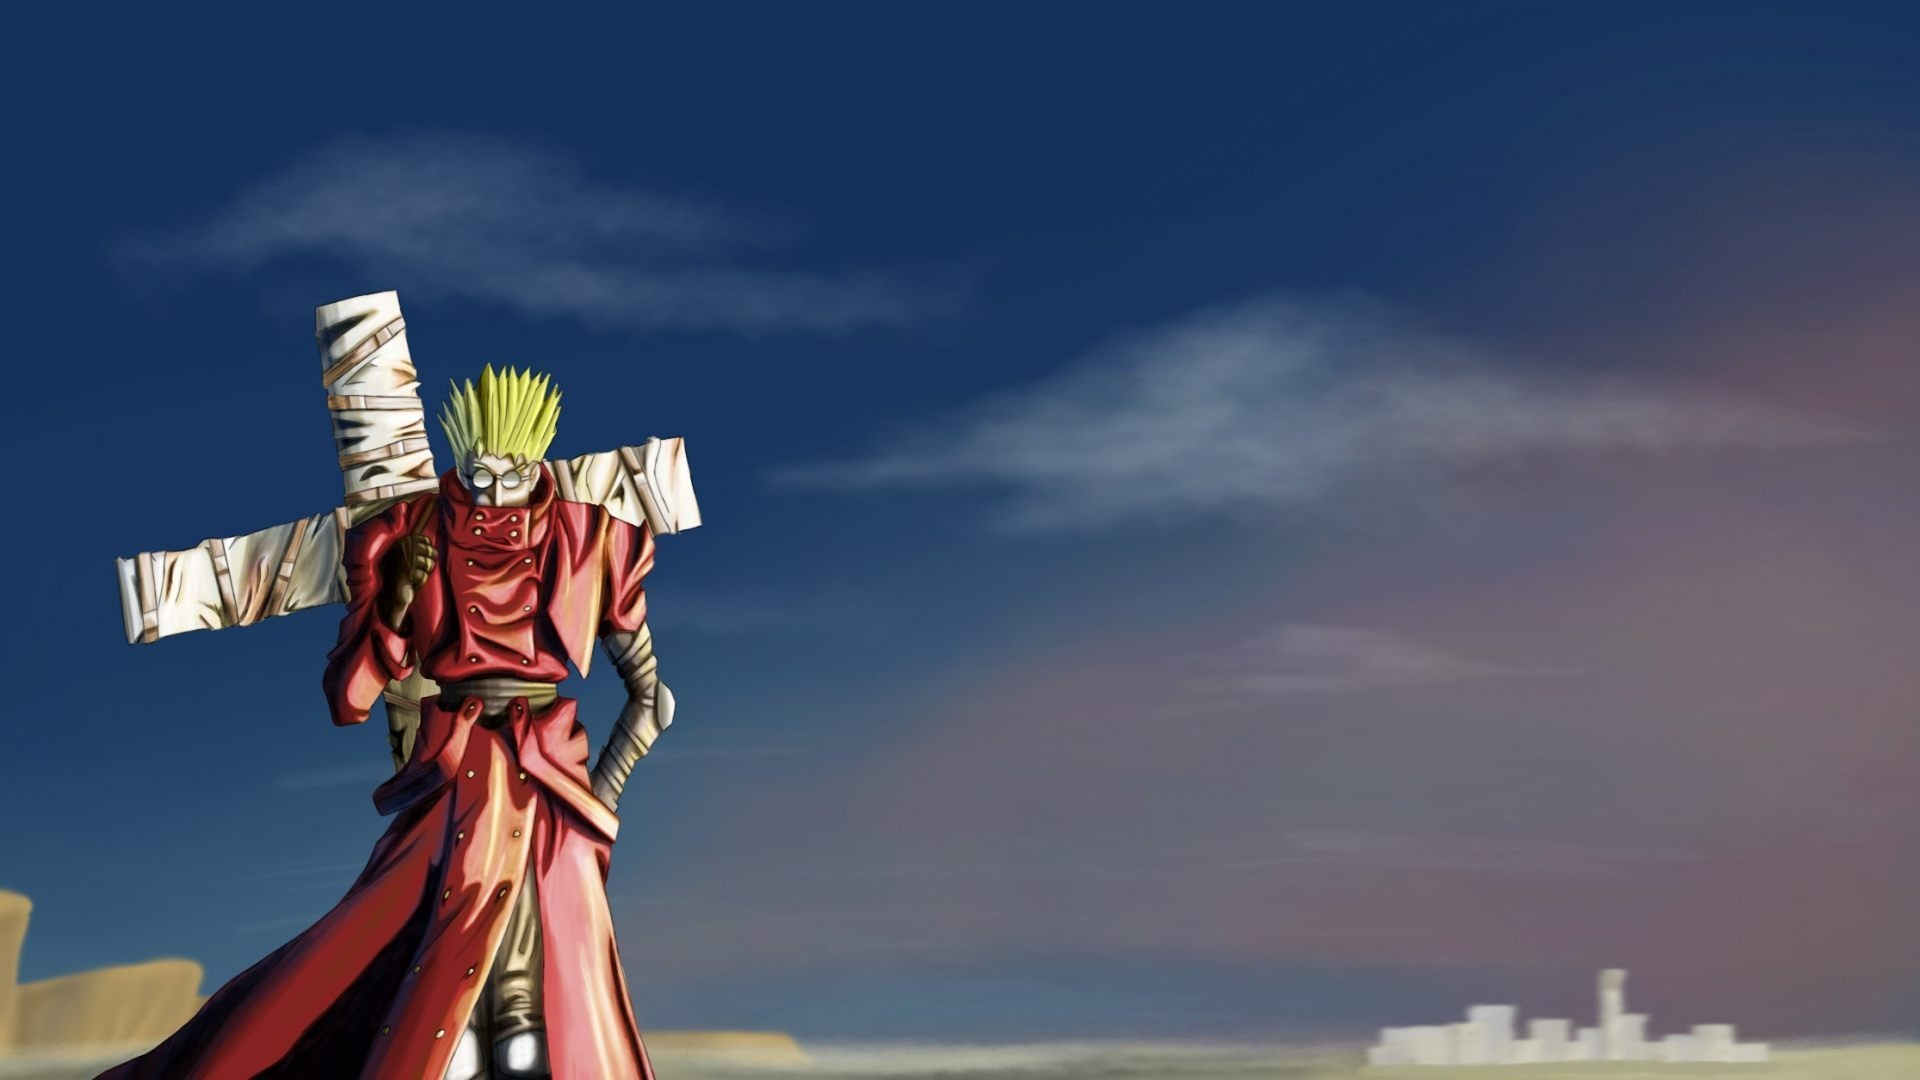 1920x1080 Vash the Stampede Wallpaper (42+ pictures